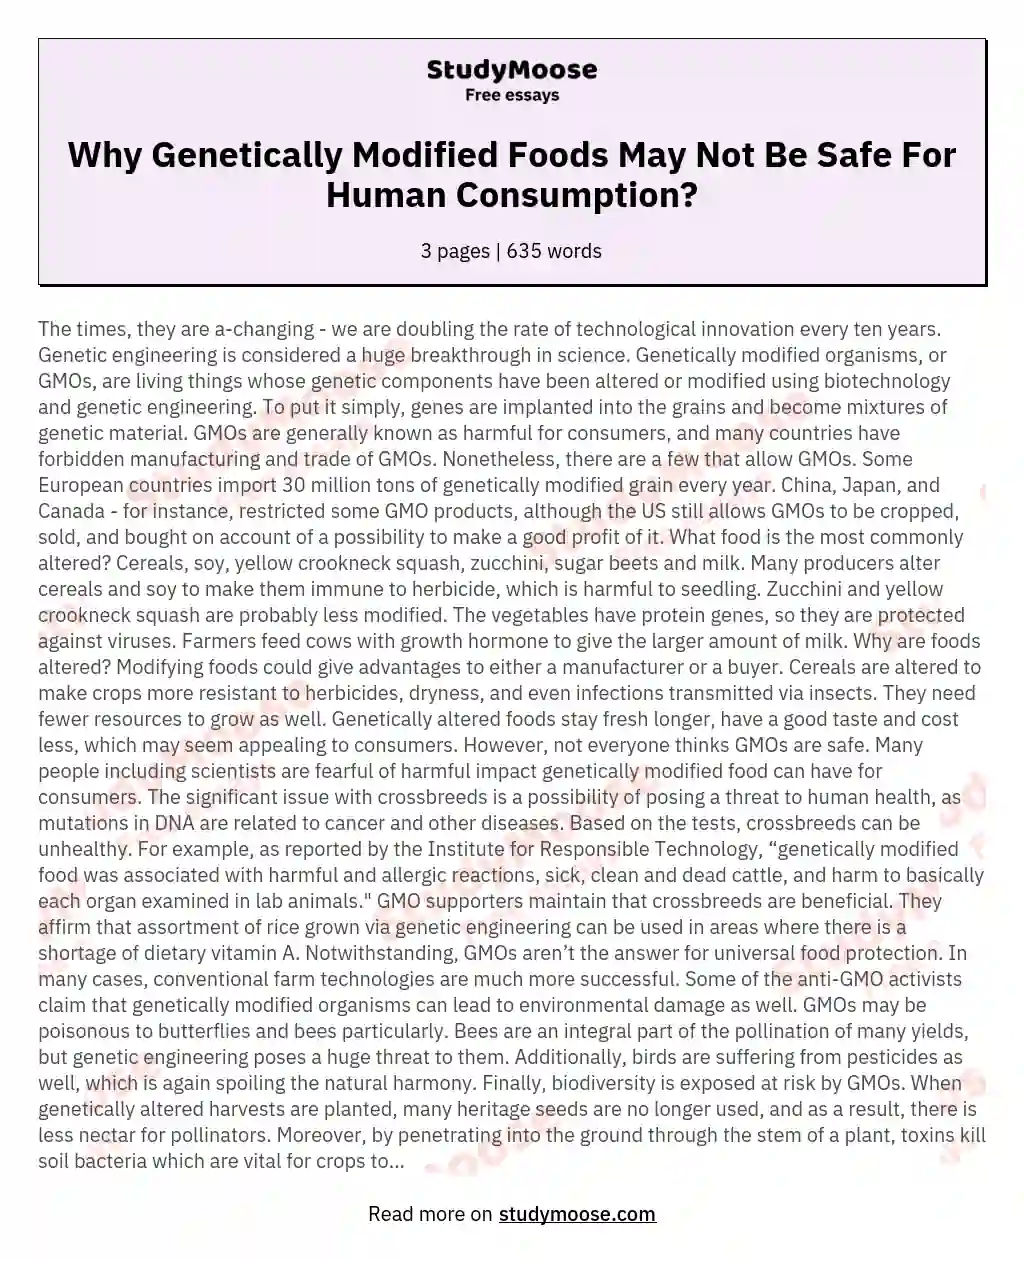 Why Genetically Modified Foods May Not Be Safe For Human Consumption? essay